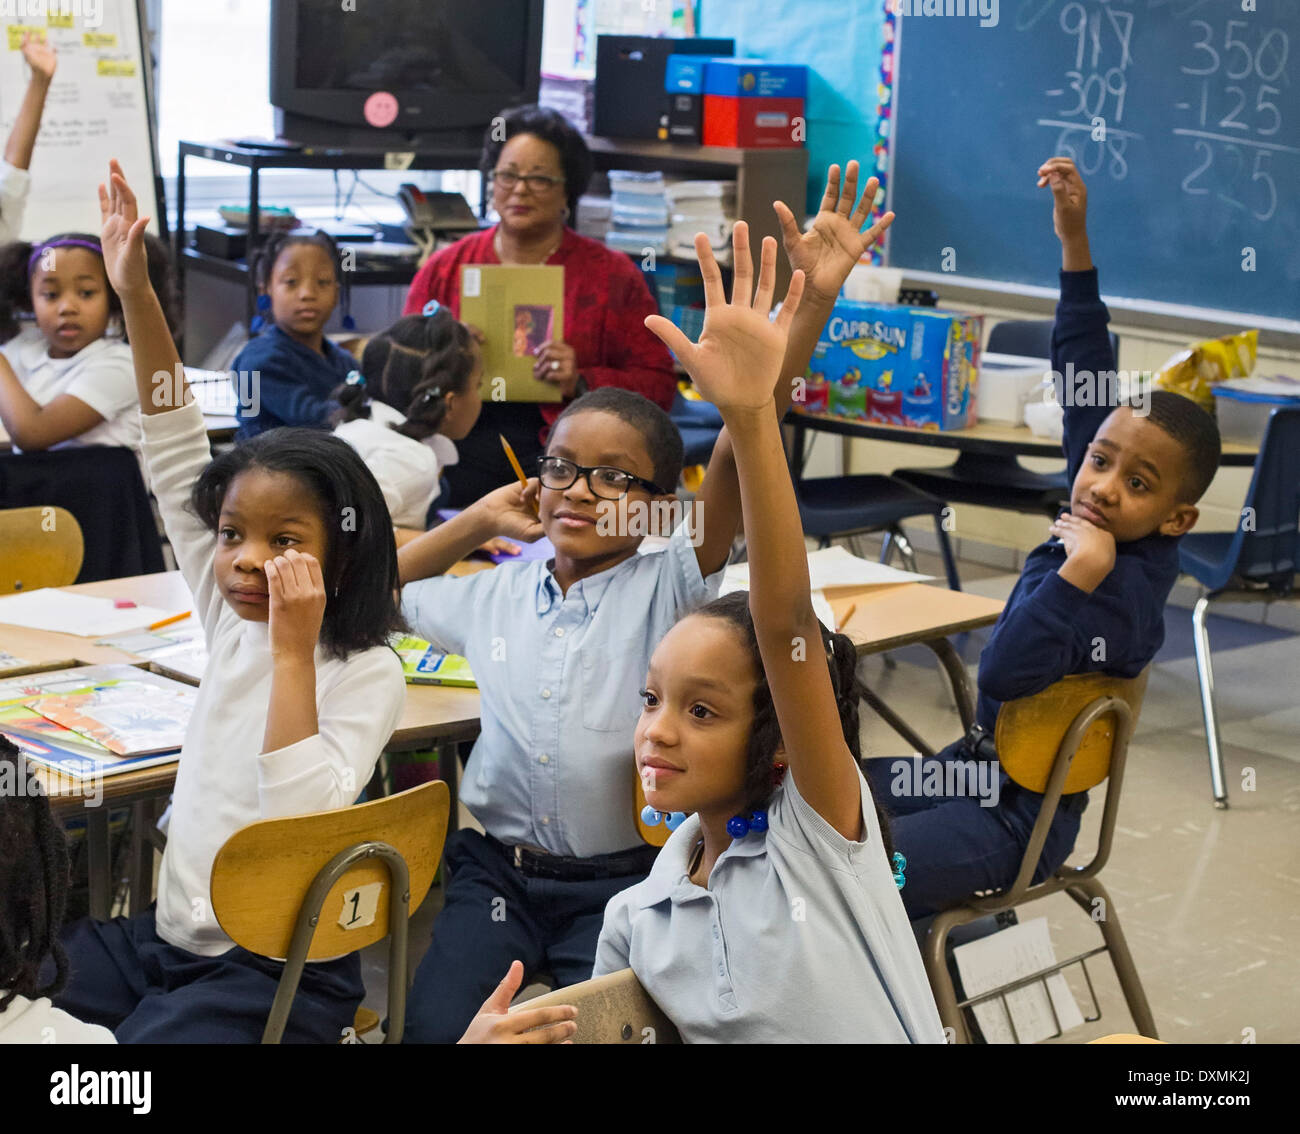 Detroit, Michigan - Students at Chrysler Elementary School ask questions after hearing a volunteer read a children's book. Stock Photo